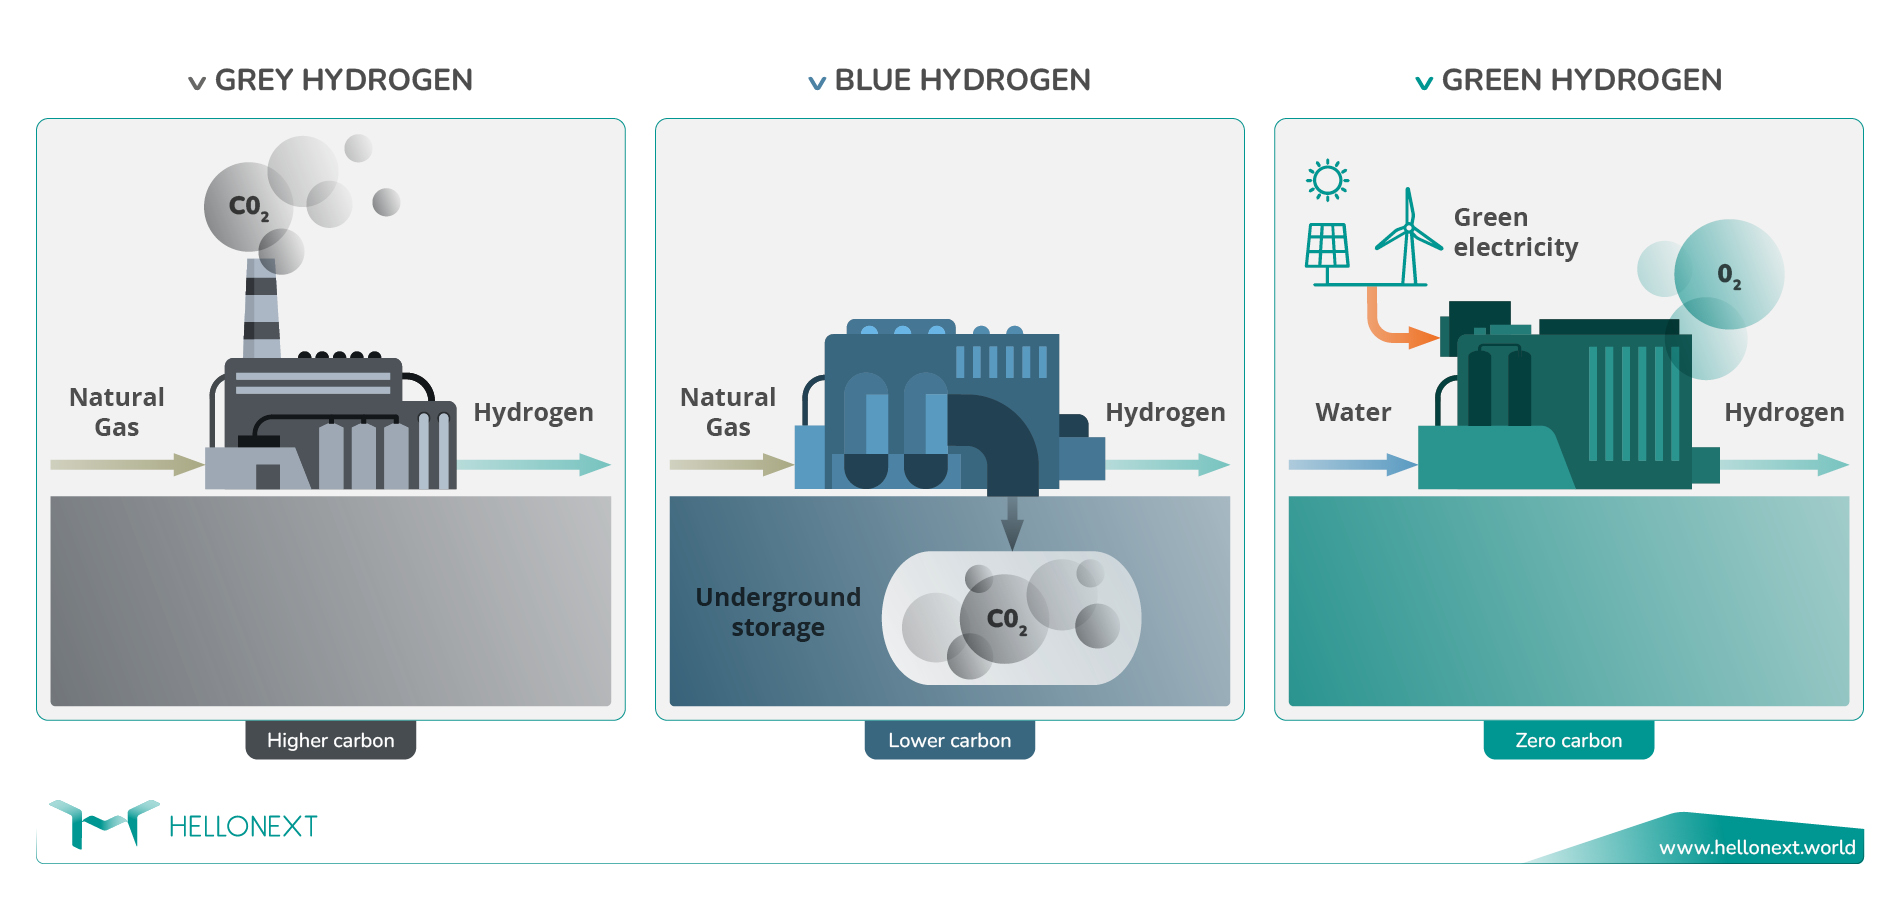 Green, Blue and Grey Hydrogen: the main differences